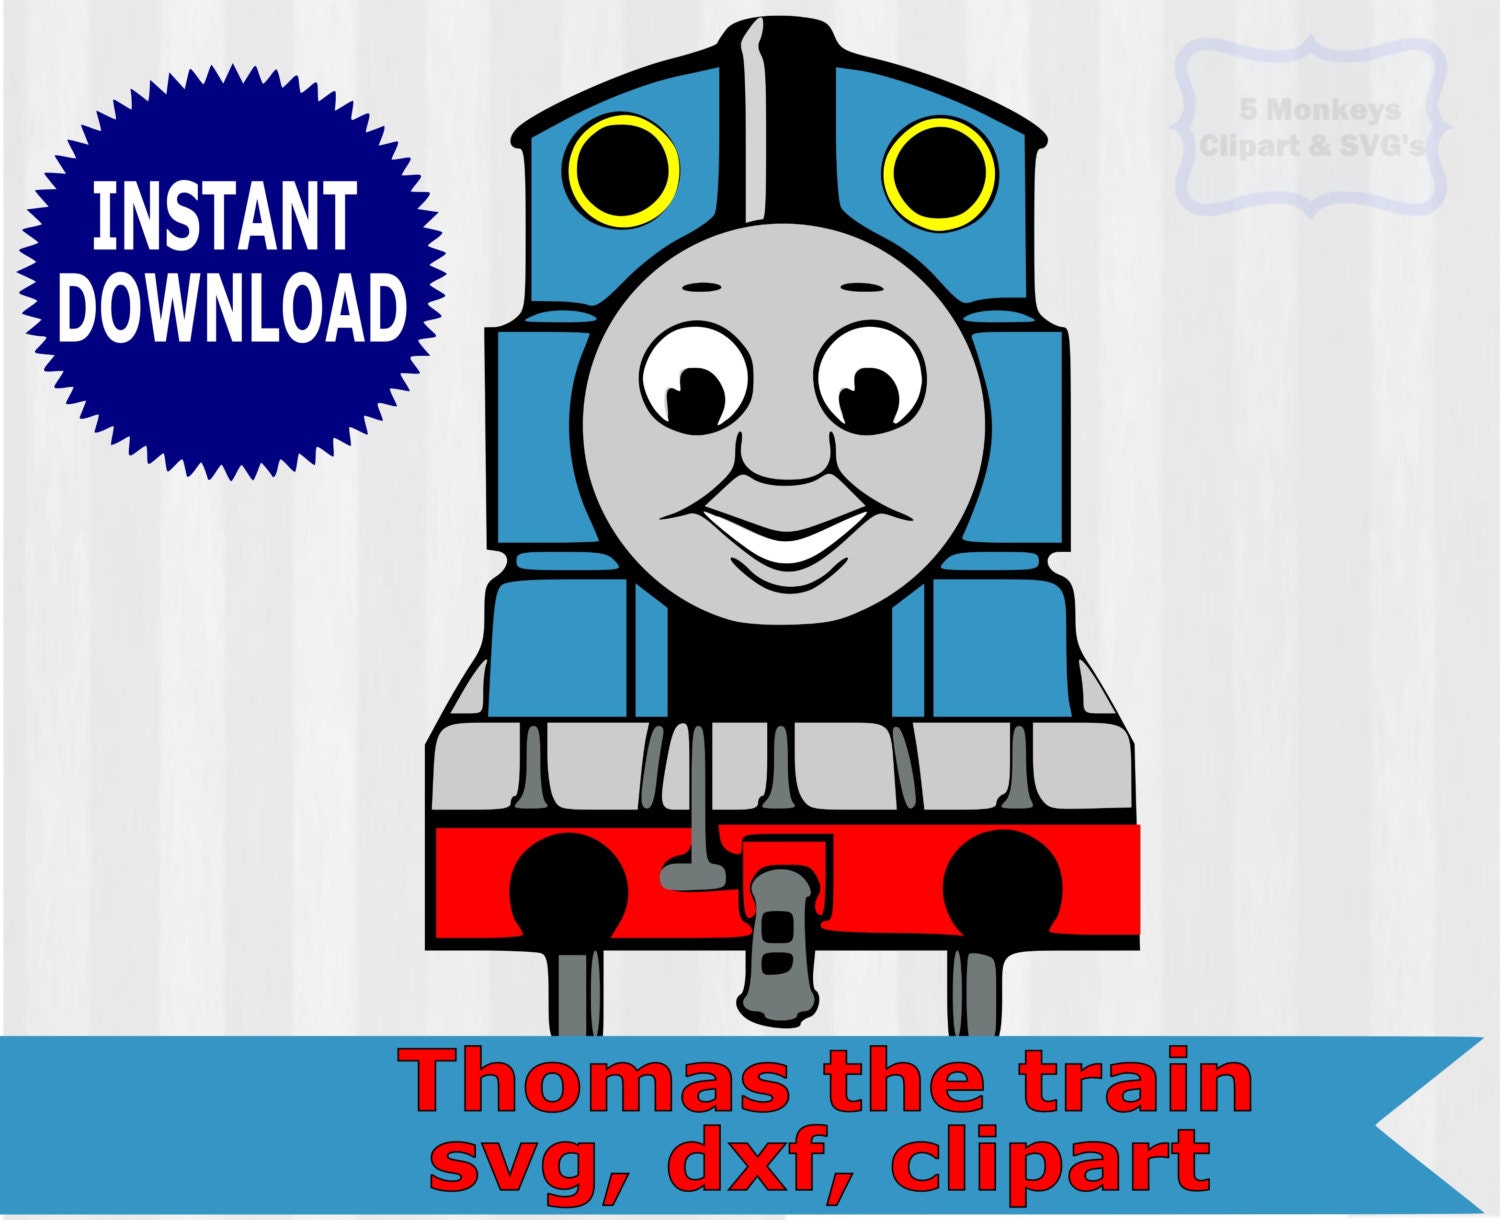 Download Thomas the train SVG thomas the train clipart by ...